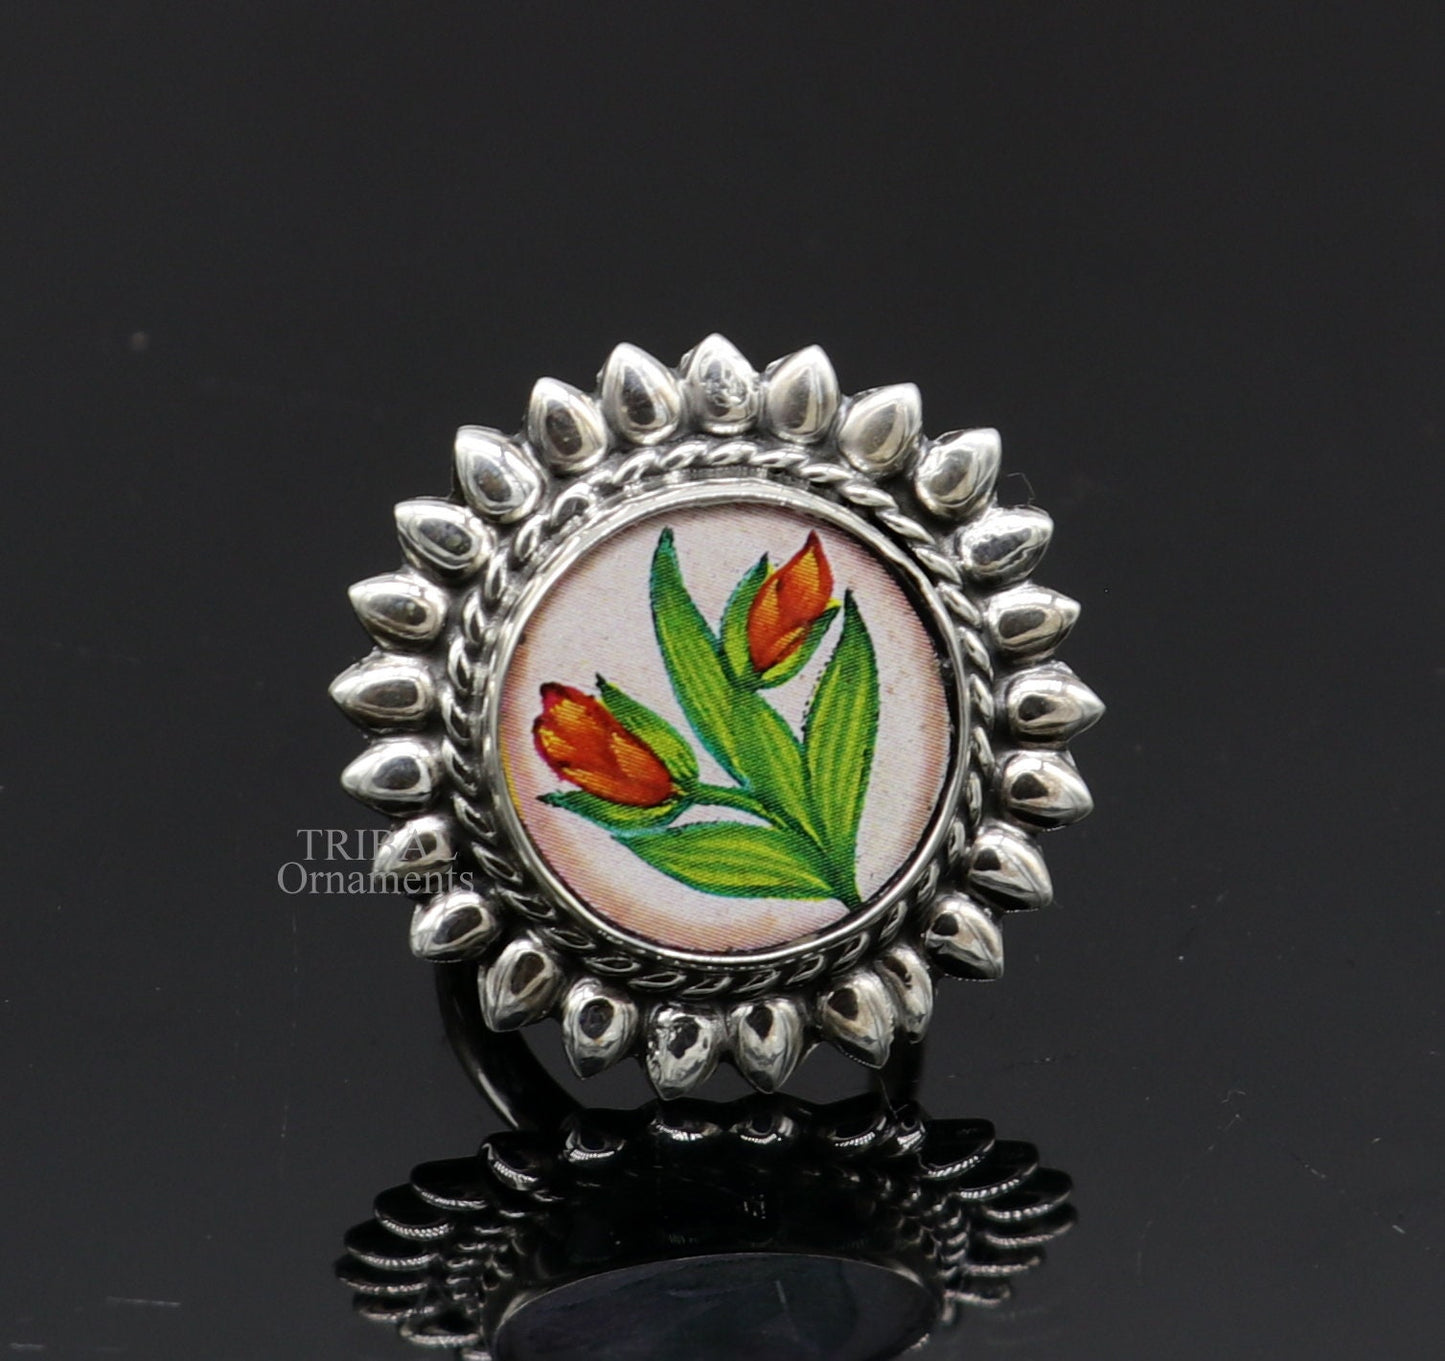 925 sterling silver adjustable ring band with fabulous flower painting ring unisex India jewelry ring505 - TRIBAL ORNAMENTS